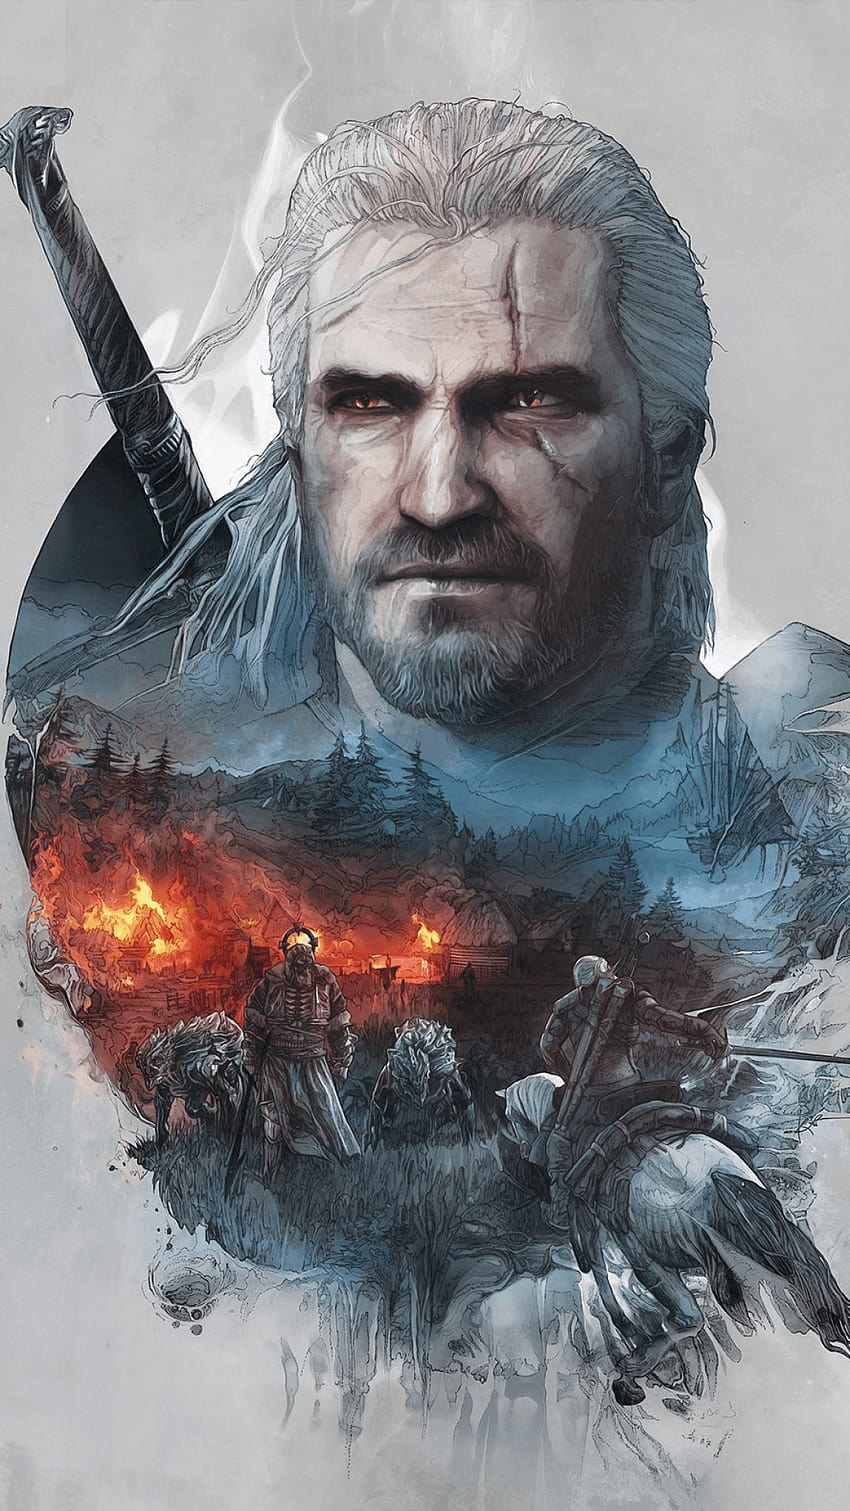 Video Game/The Witcher 3: Wild Hunt, geralt of rivia mobile HD phone wallpaper